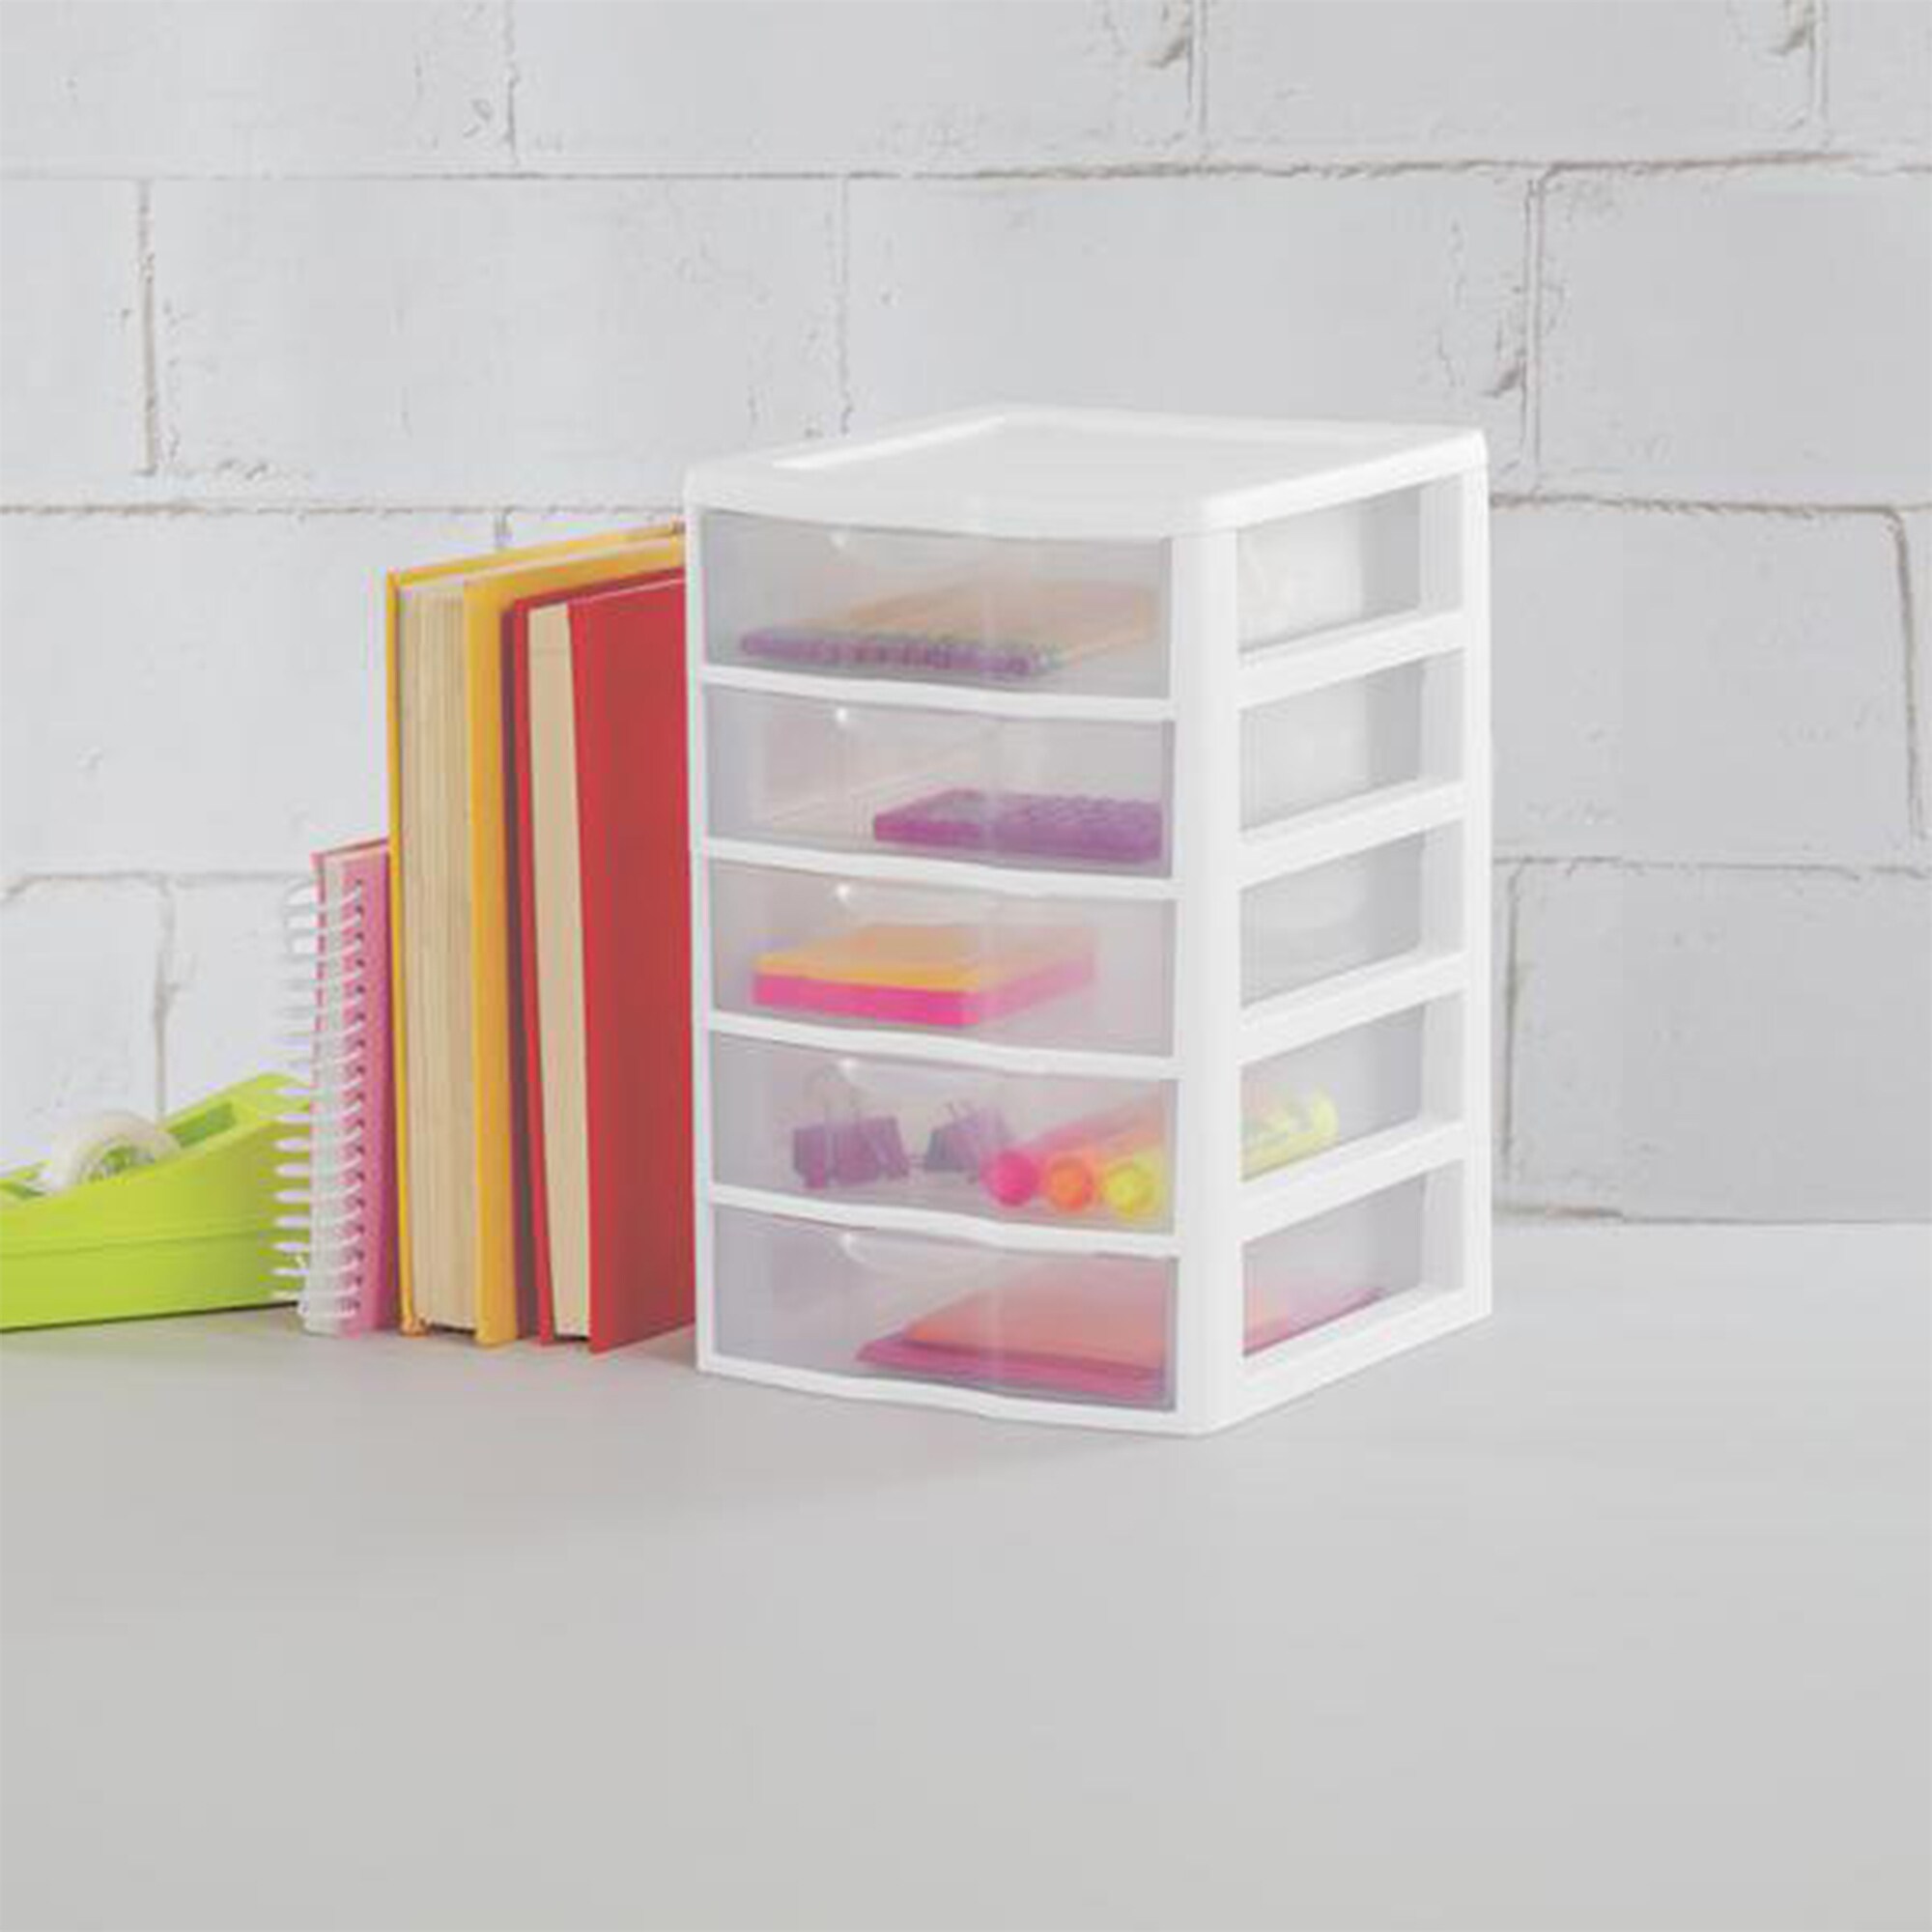 Sterilite Clear Plastic Stackable Small 3 Drawer Storage System for Home  Office, Dorm Room, or Bathrooms, White Frame, (12 Pack)